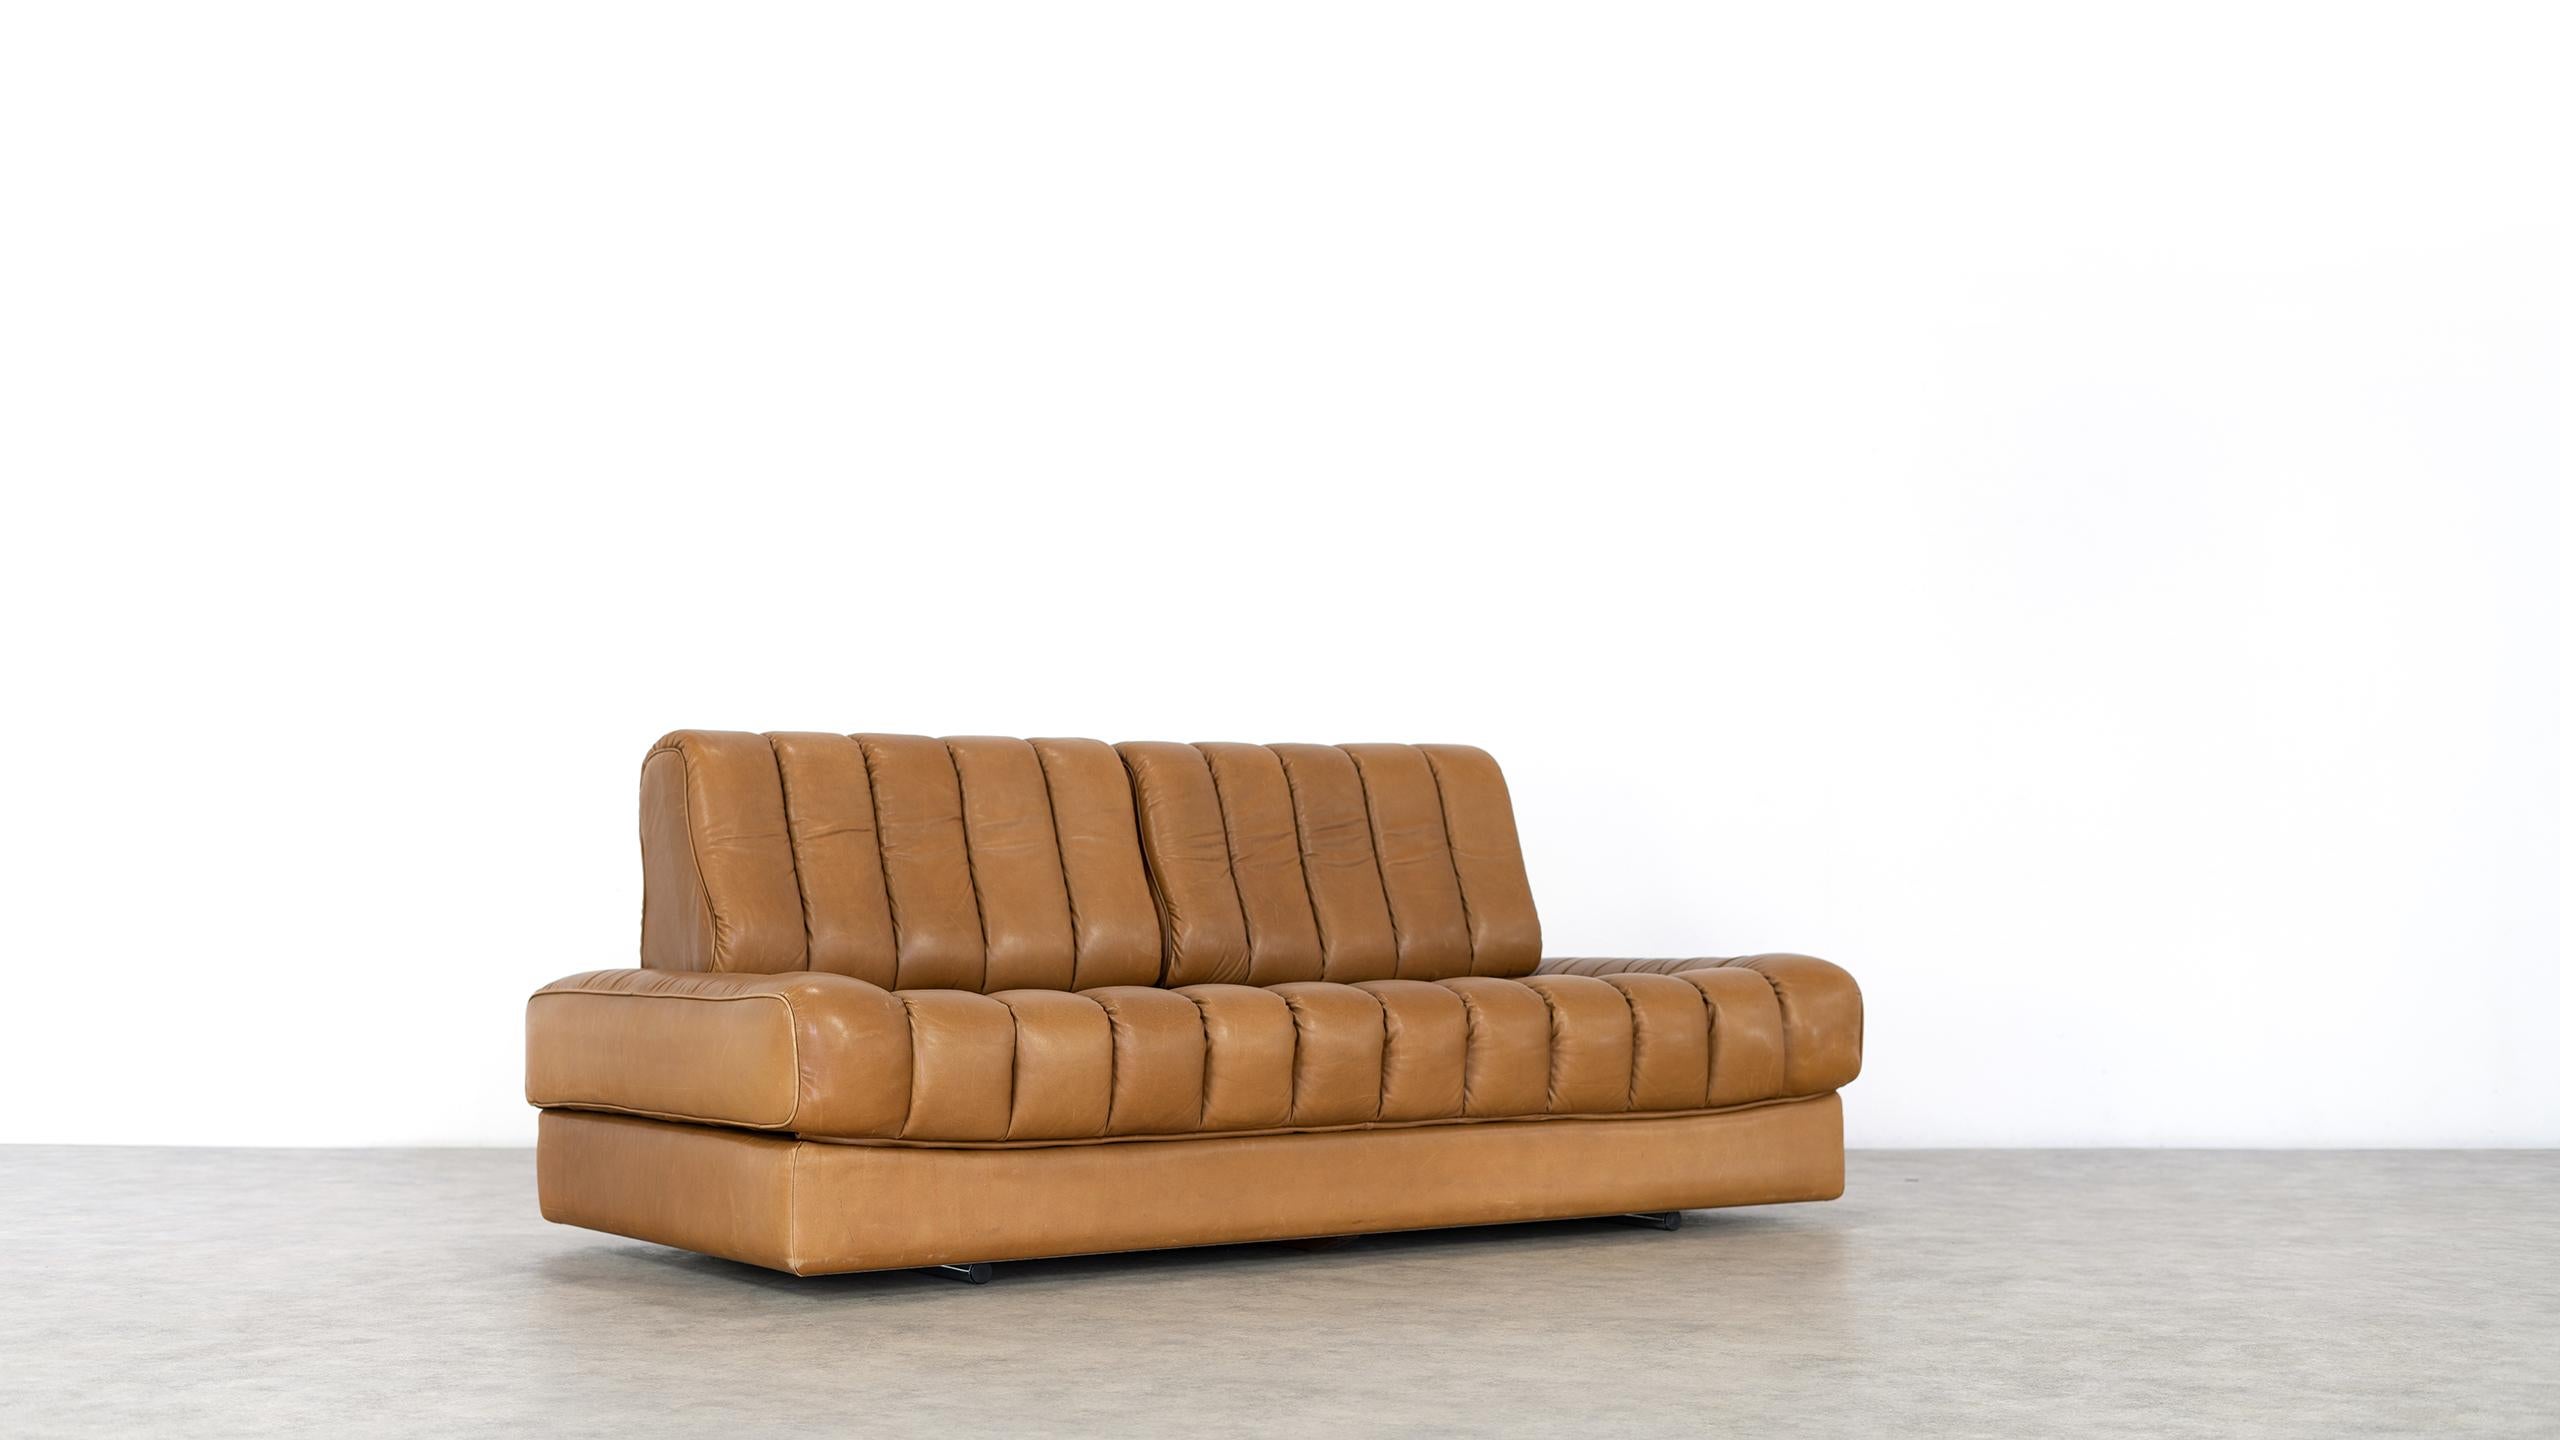 This daybed DS 85 in cognac leather was made in the 1970s by De Sede in Switzerland.

The versatile sofa and daybed can also be folded out into a double bed, the seat cover is invisibly connected by zipper.
The backrests are removable - the small